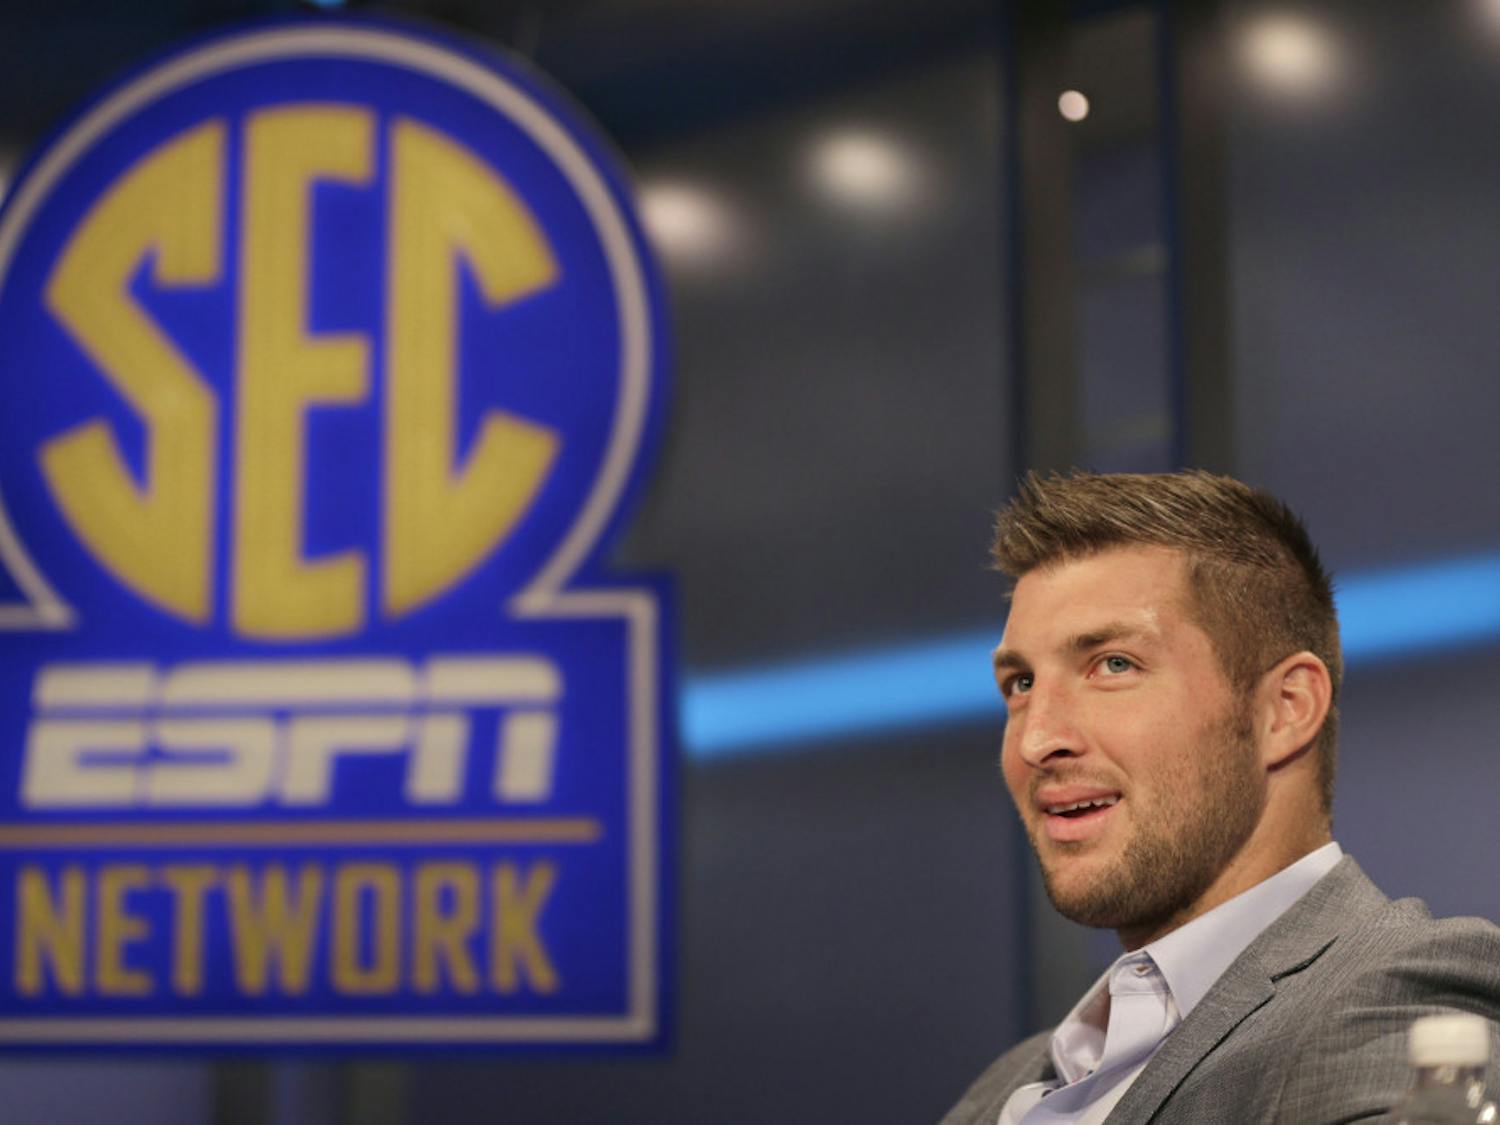 Tim Tebow answers a question during a interview on the set of ESPN's new SEC Network in Charlotte, N.C. on Aug. 6.